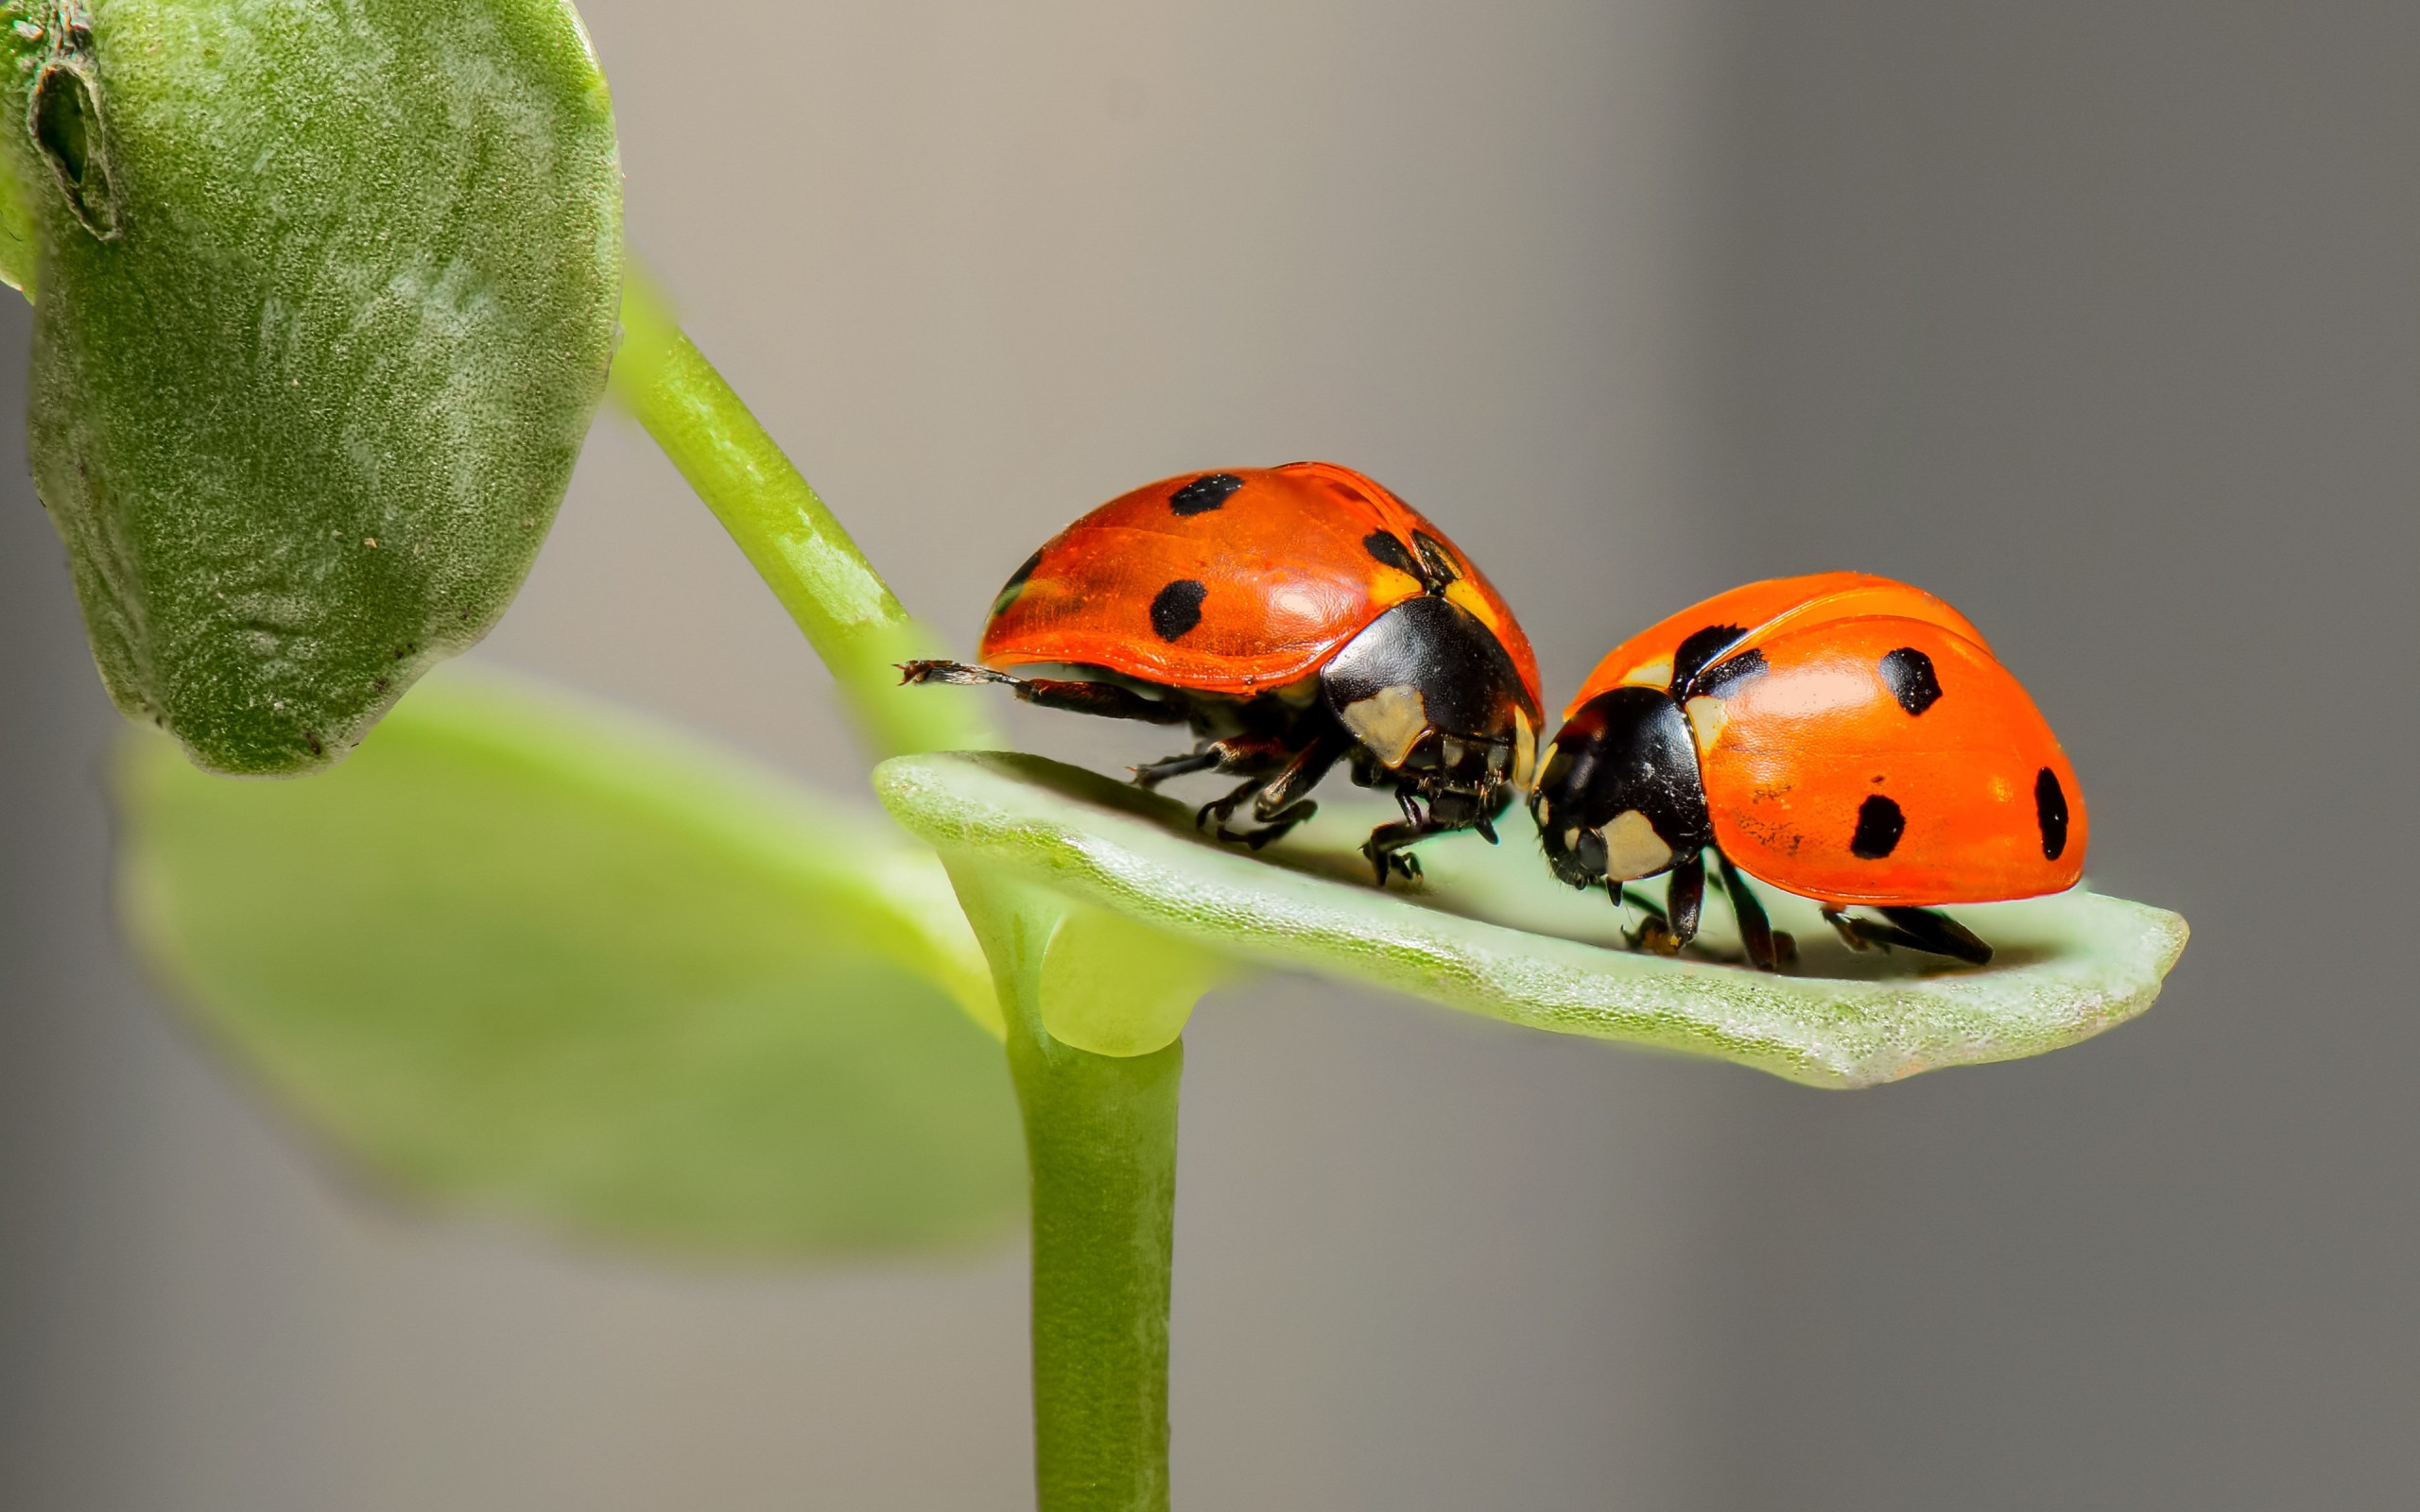 Ladybird, the insect wallpaper 2560x1600